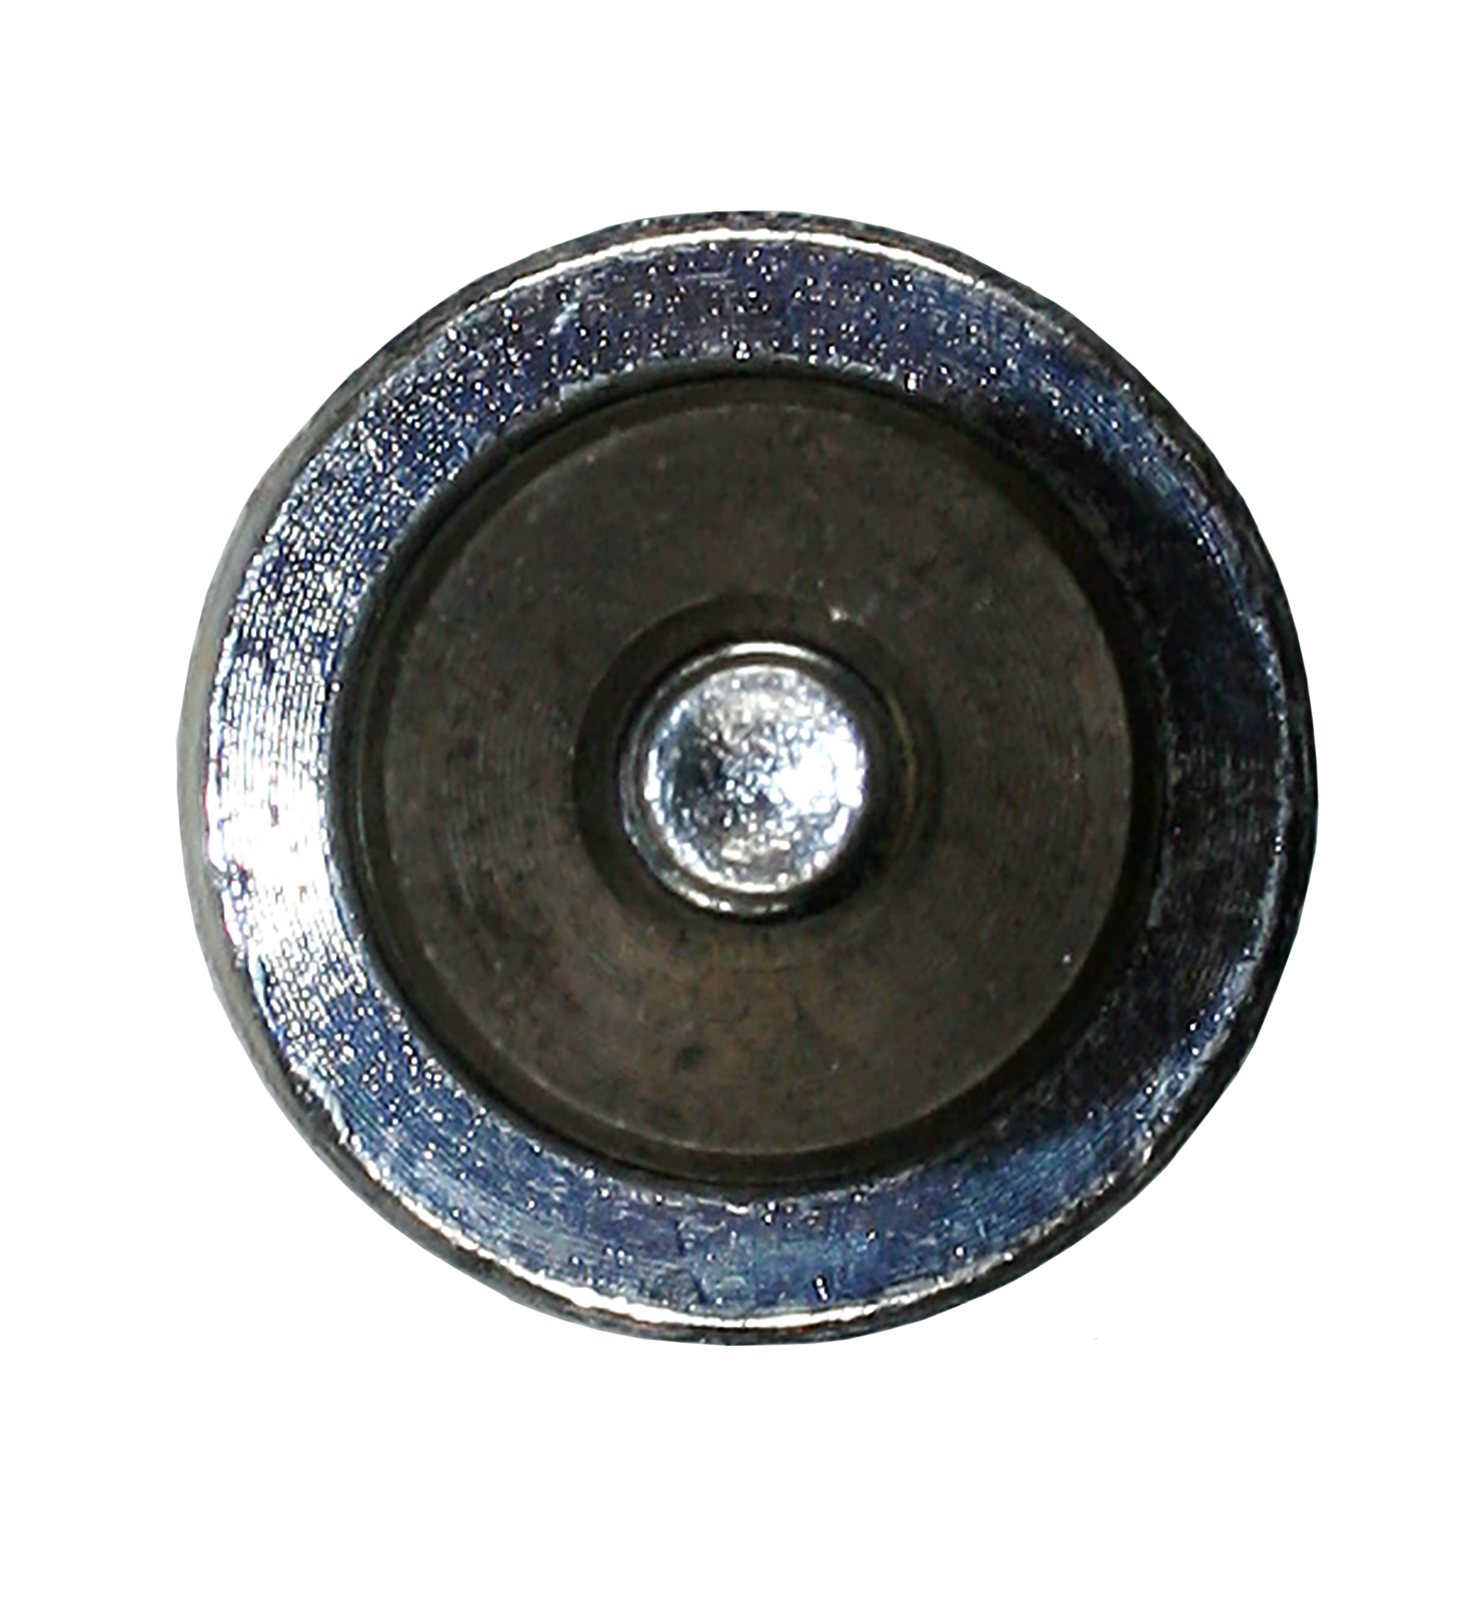 Punch for parking assistance, 21 mm